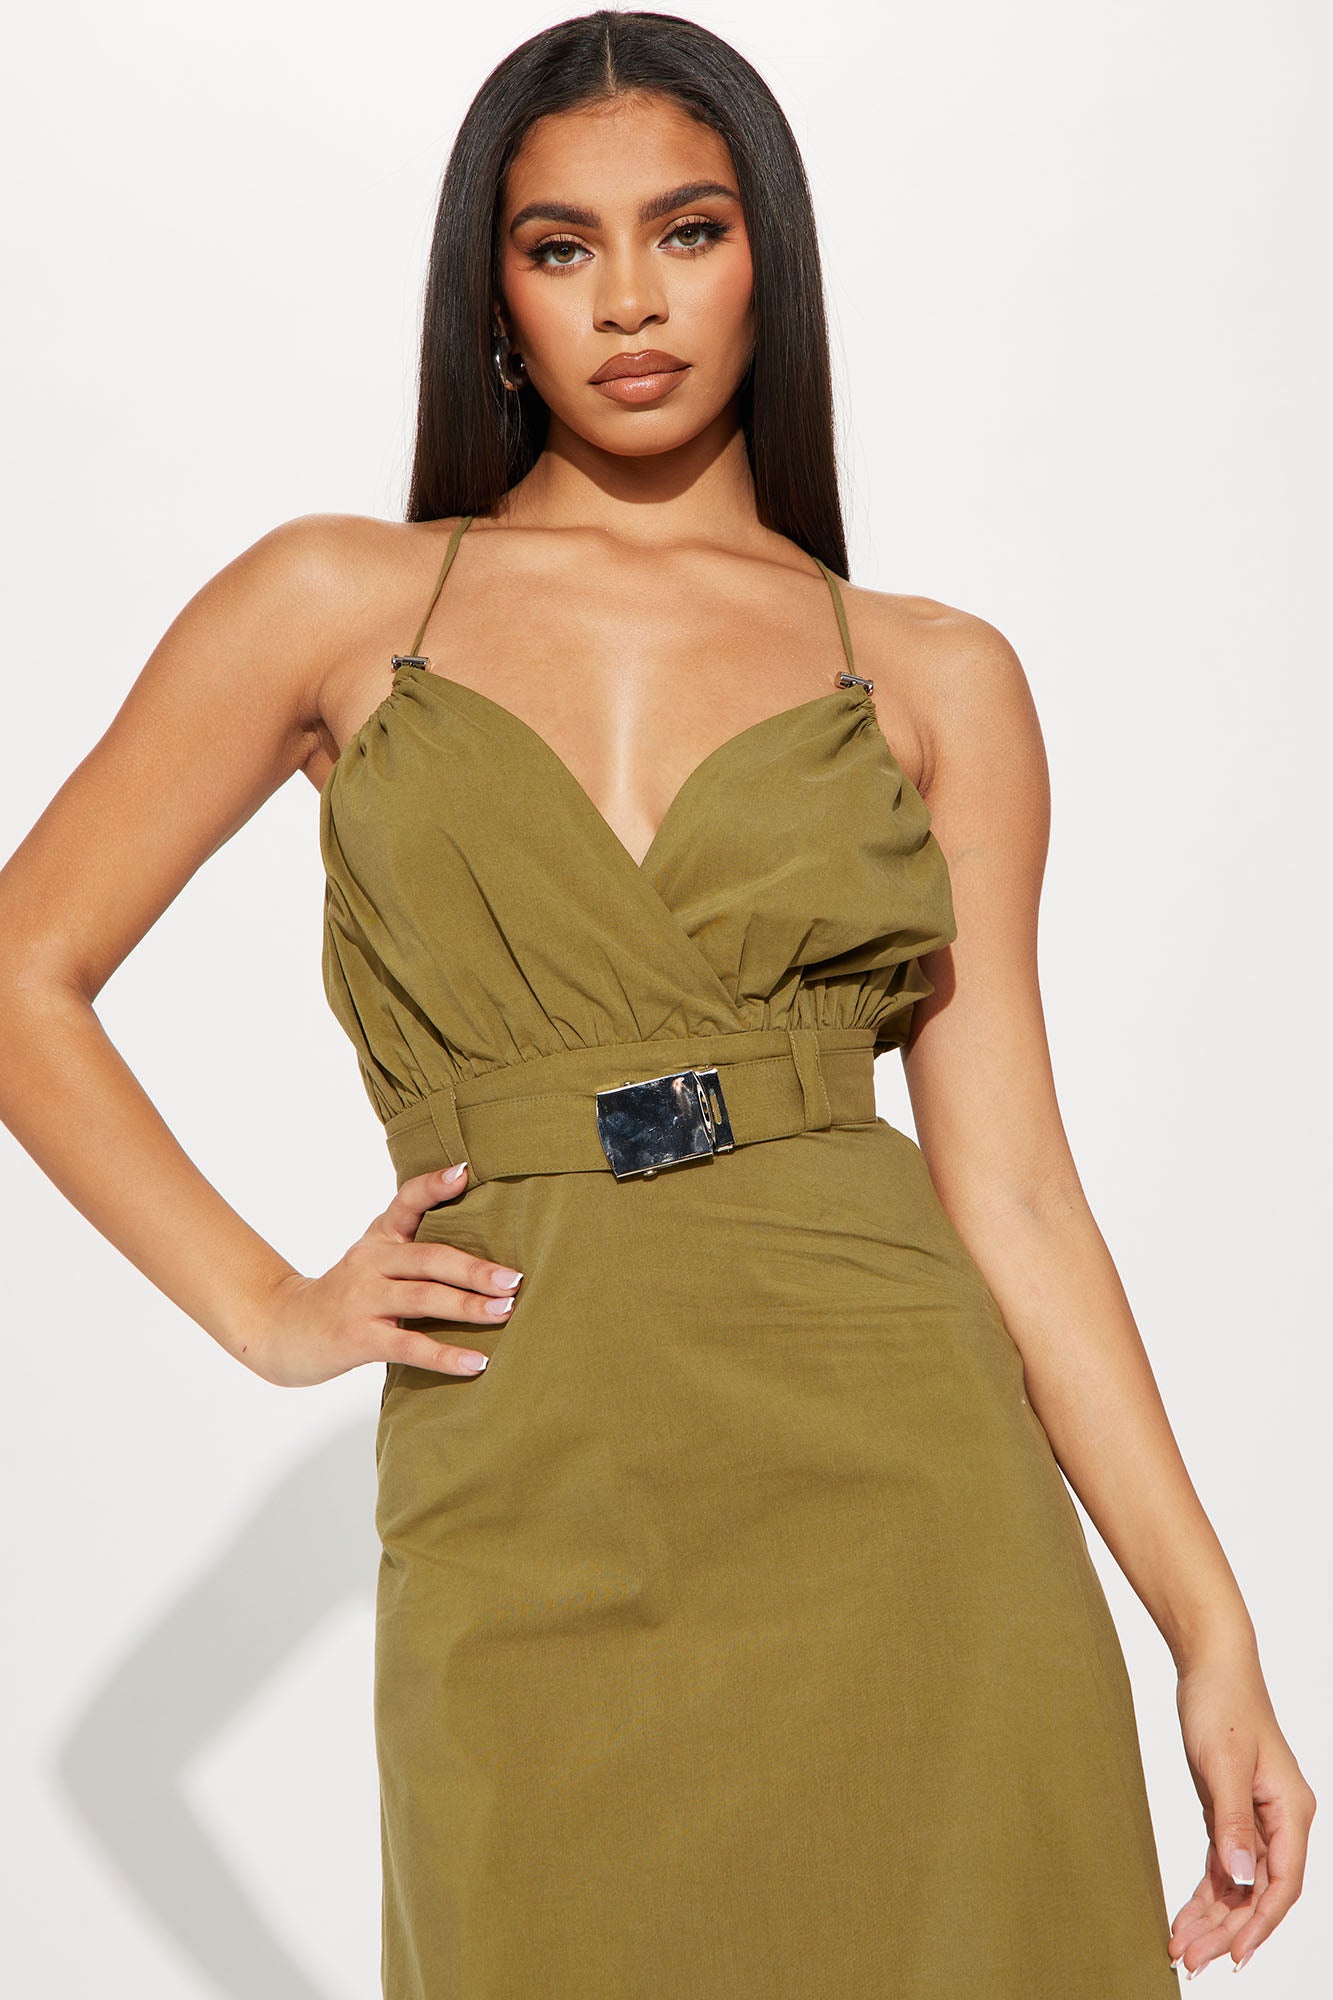 Buckle Up Maxi Dress - Olive